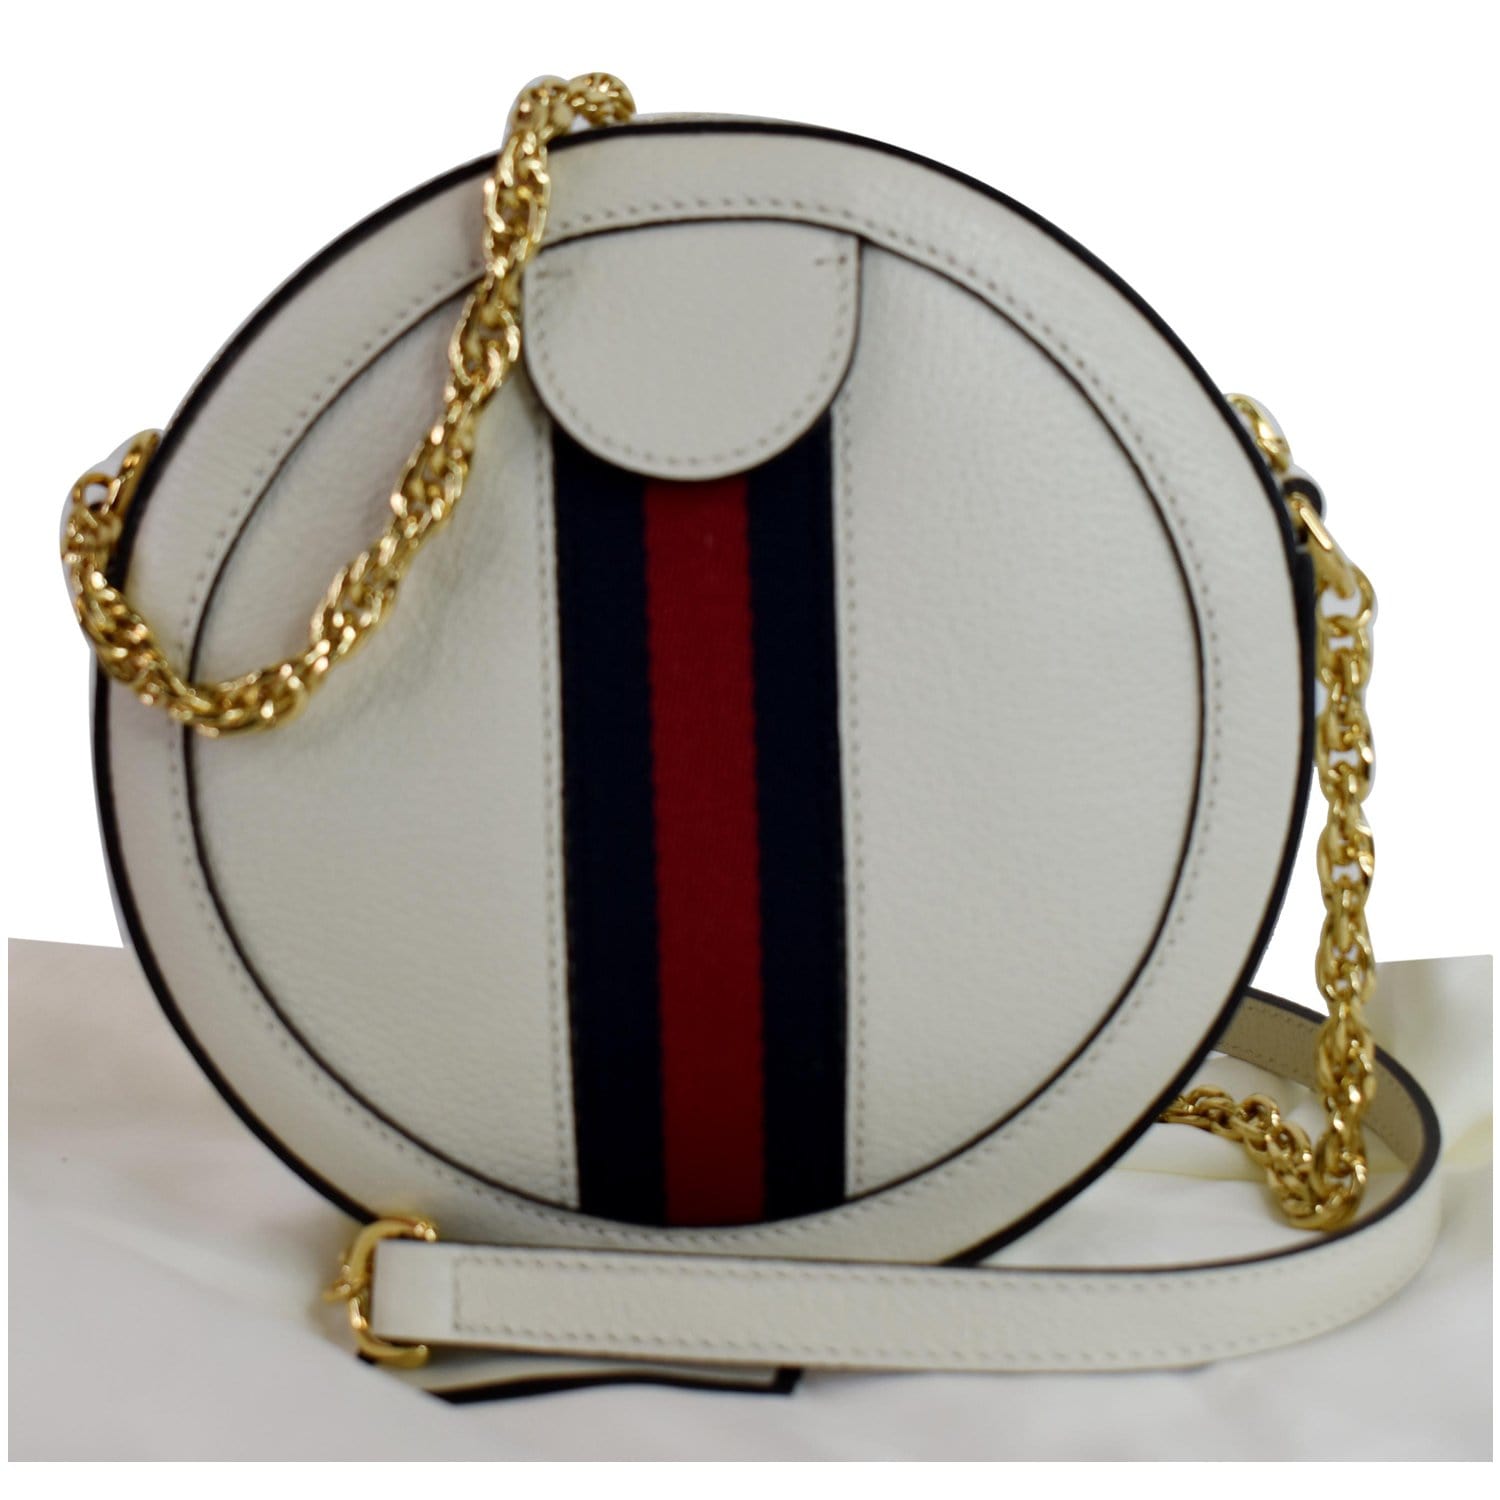 Gucci Ophidia Mini GG Round Web Leather Shoulder Bag